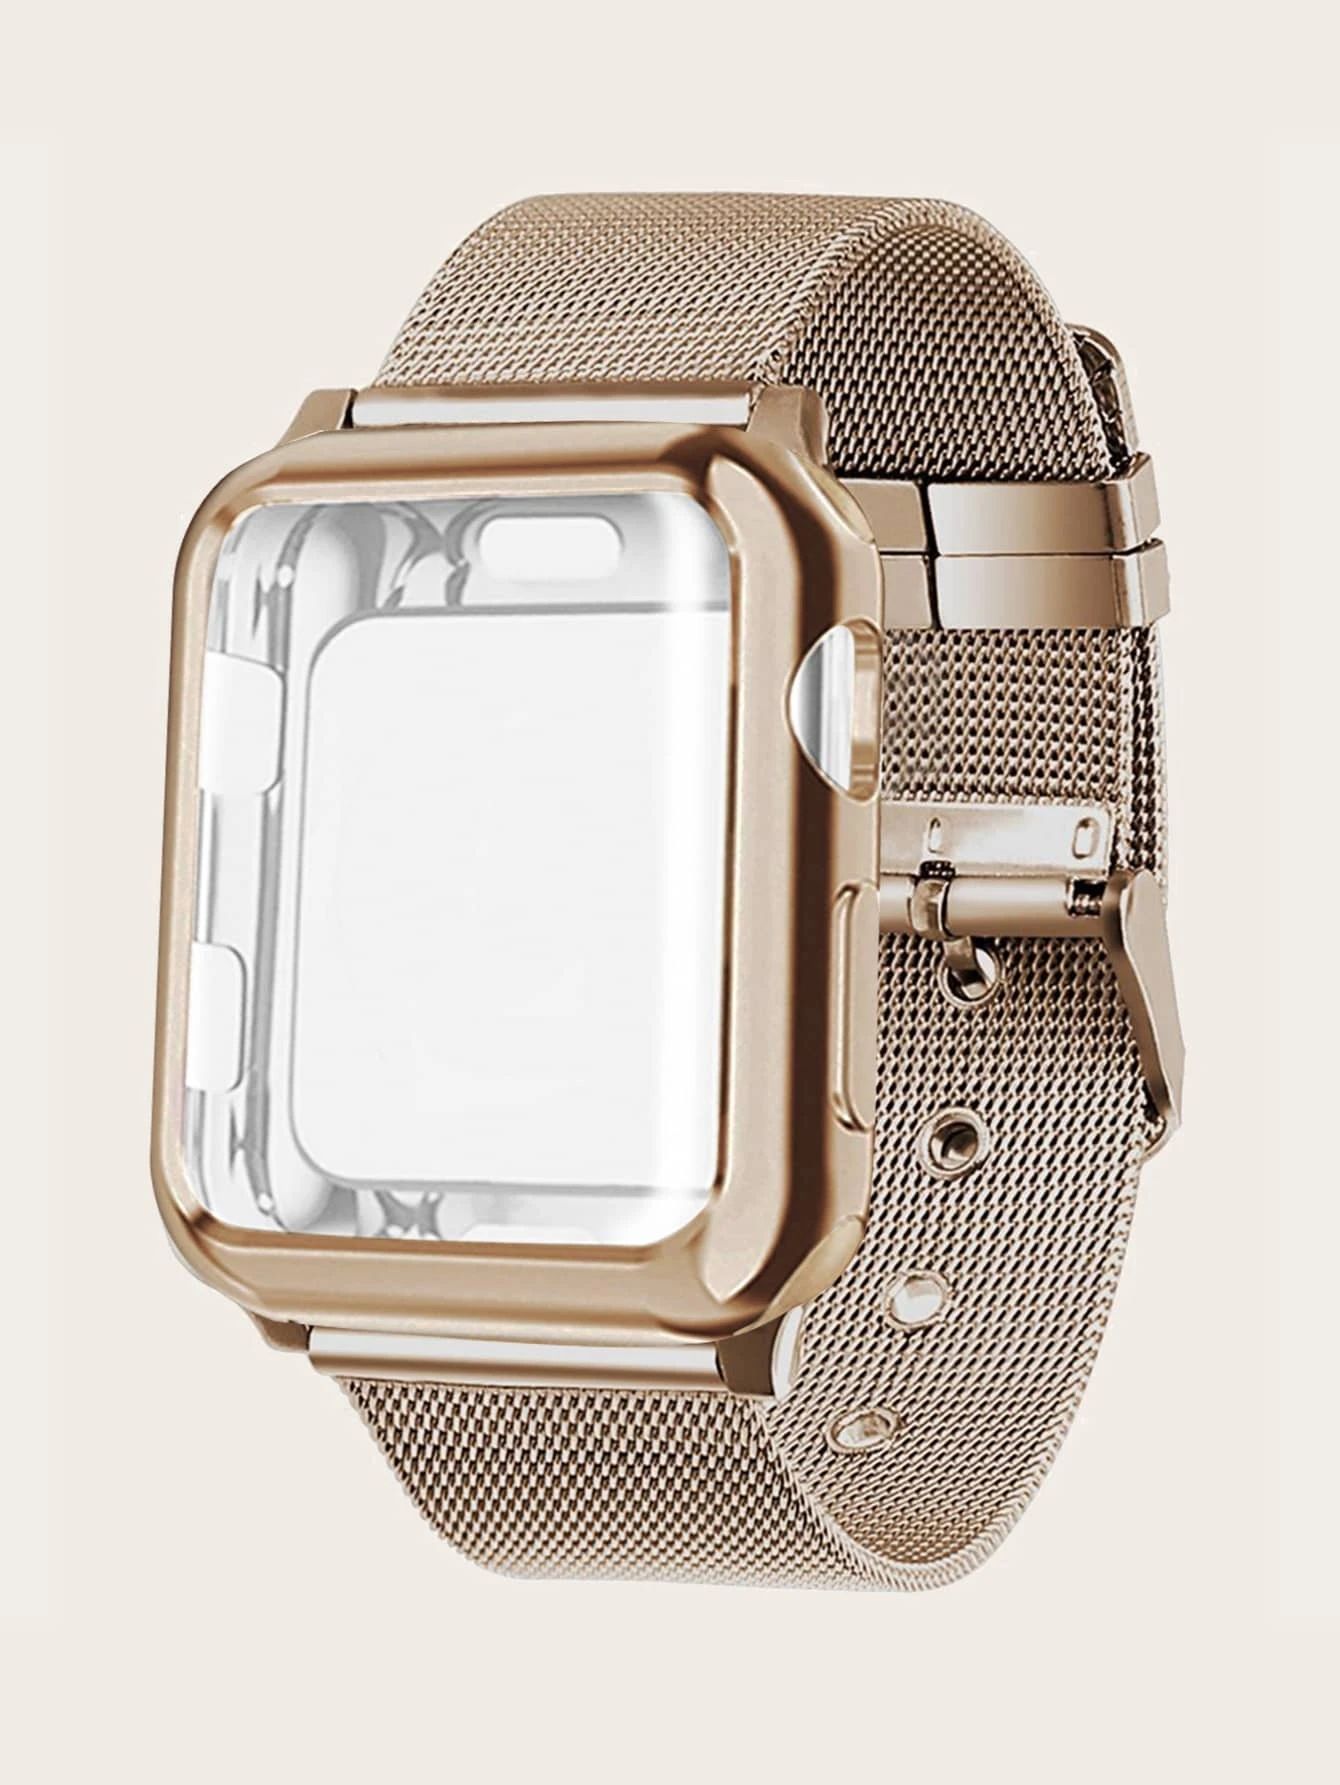 Stainless Steel Watchband & Case Compatible With Apple Watch | SHEIN